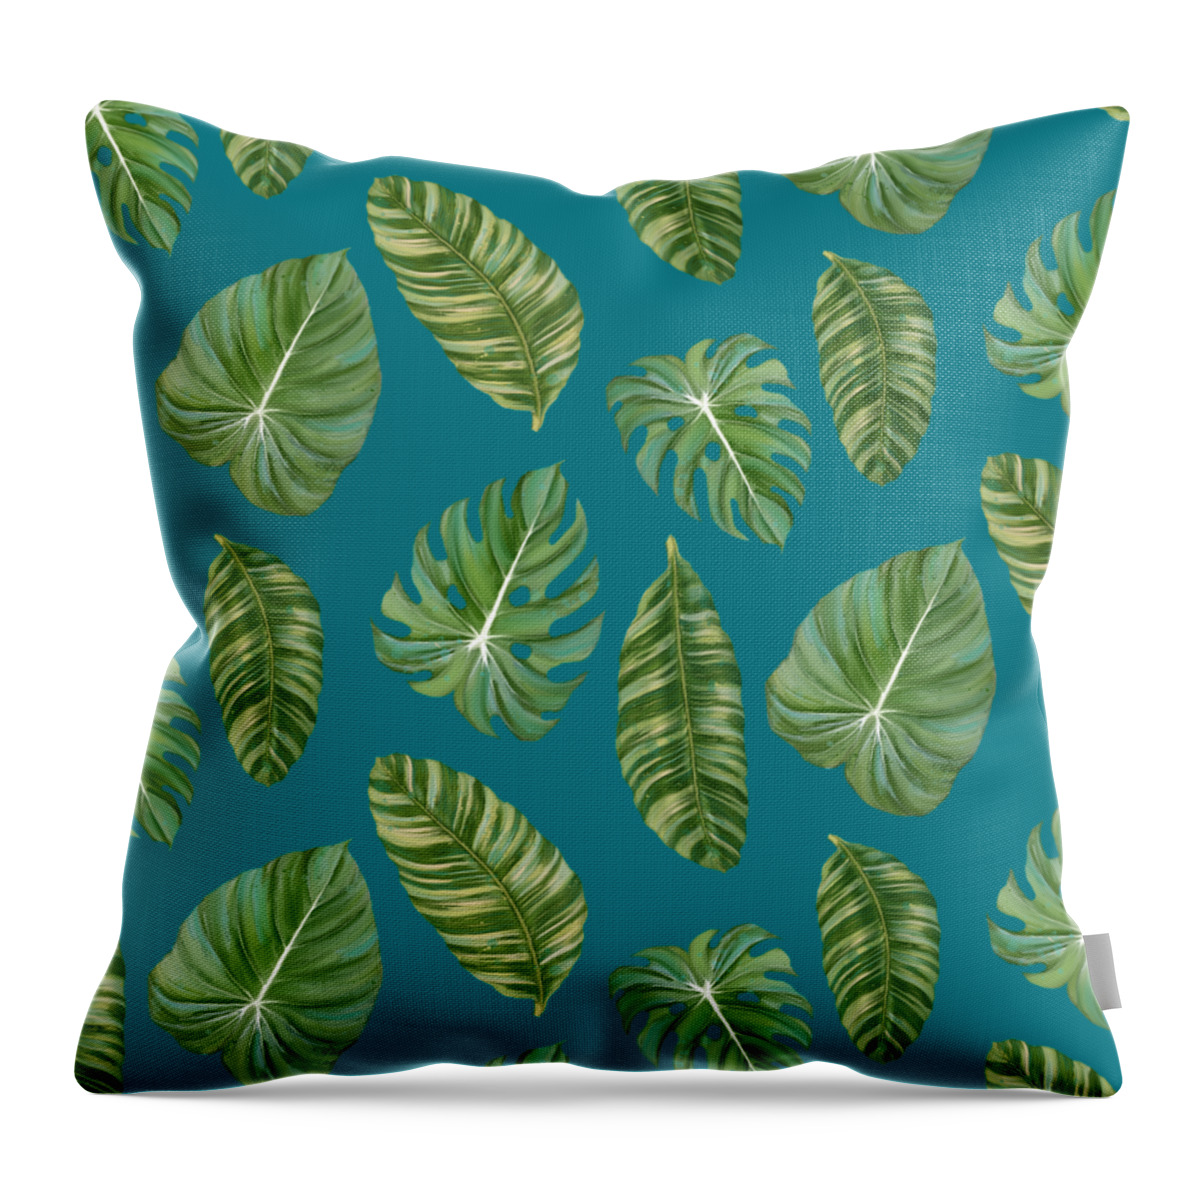 Tropical Throw Pillow featuring the painting Rainforest Resort - Tropical Leaves Elephant's Ear Philodendron Banana Leaf by Audrey Jeanne Roberts